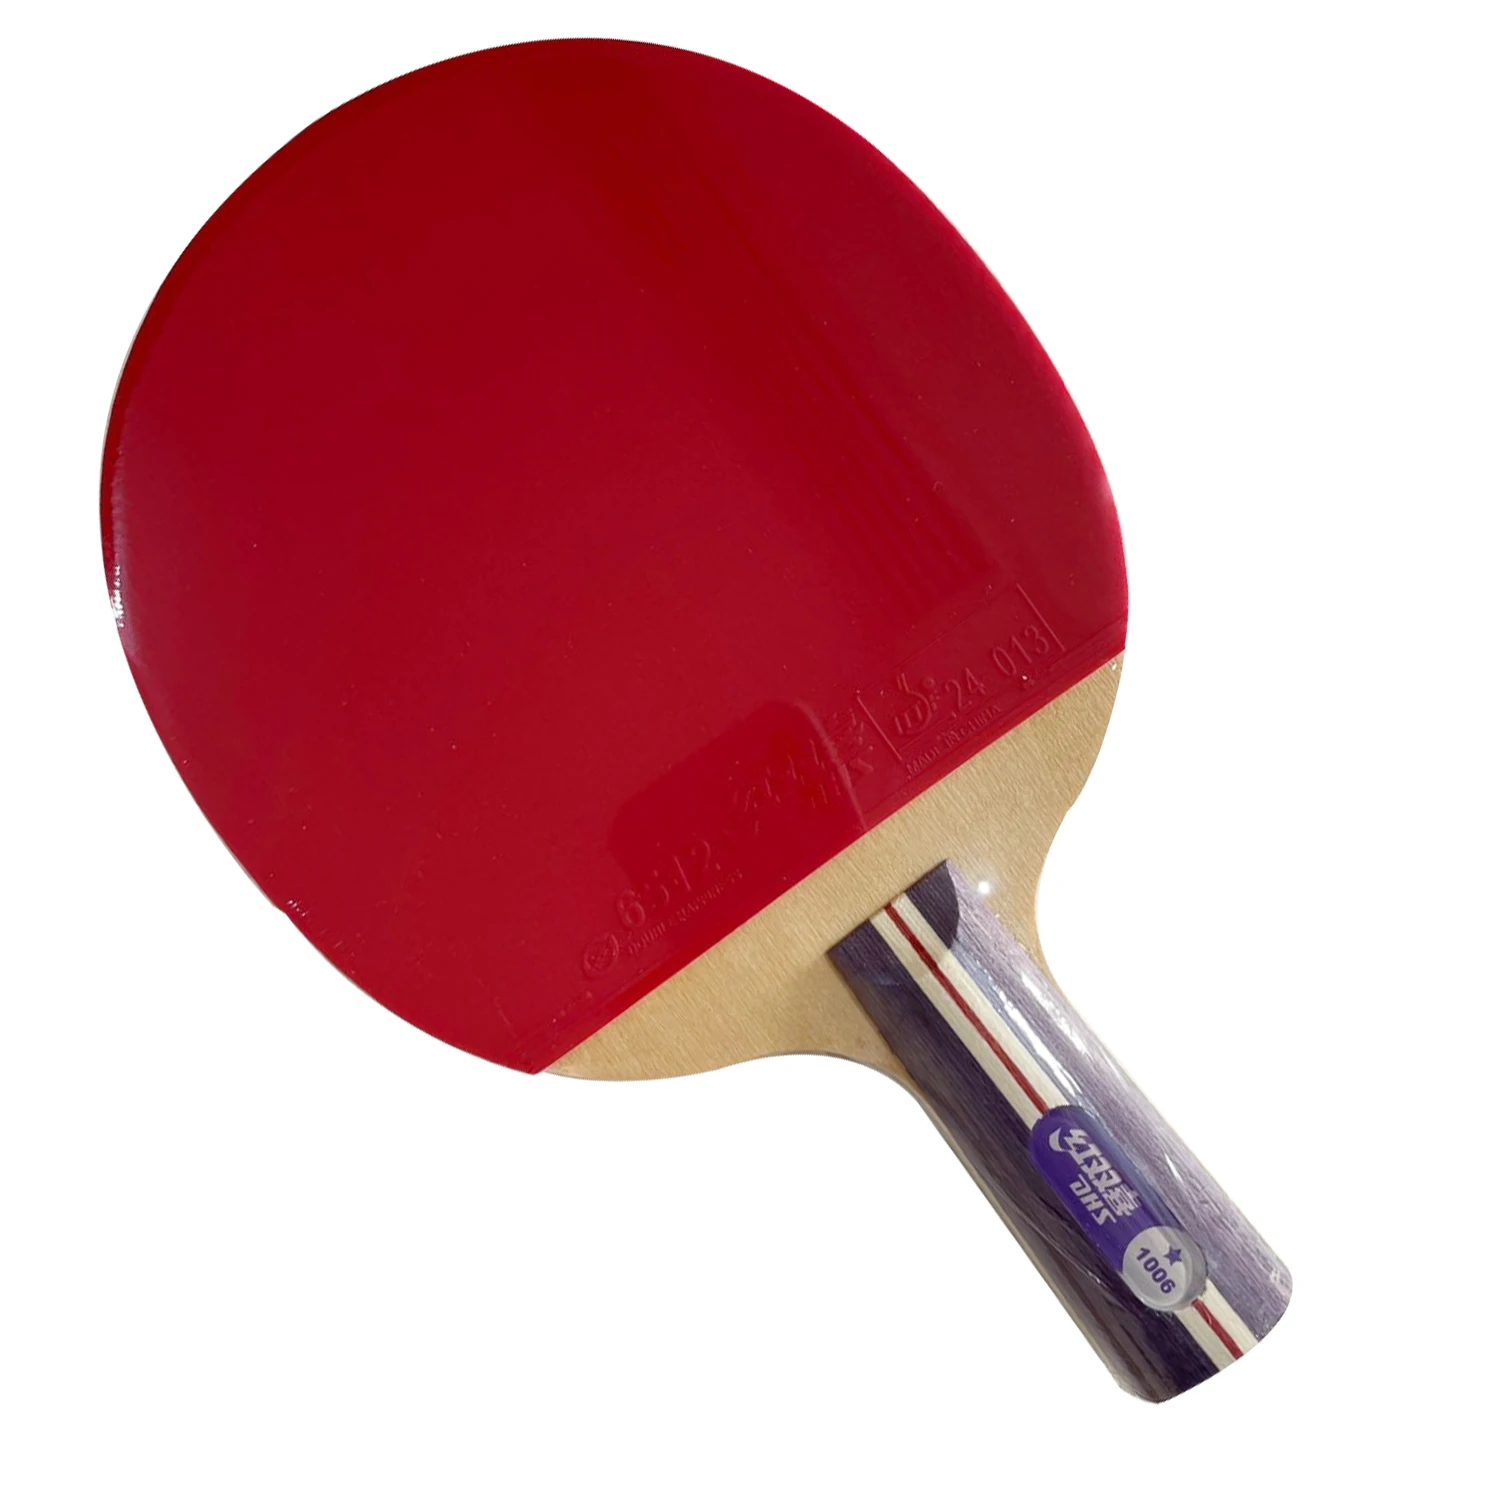 100% Genuine Long Handle DHS Paddle Bat R6002 Table Tennis Racket w/ 5 GIFTs 